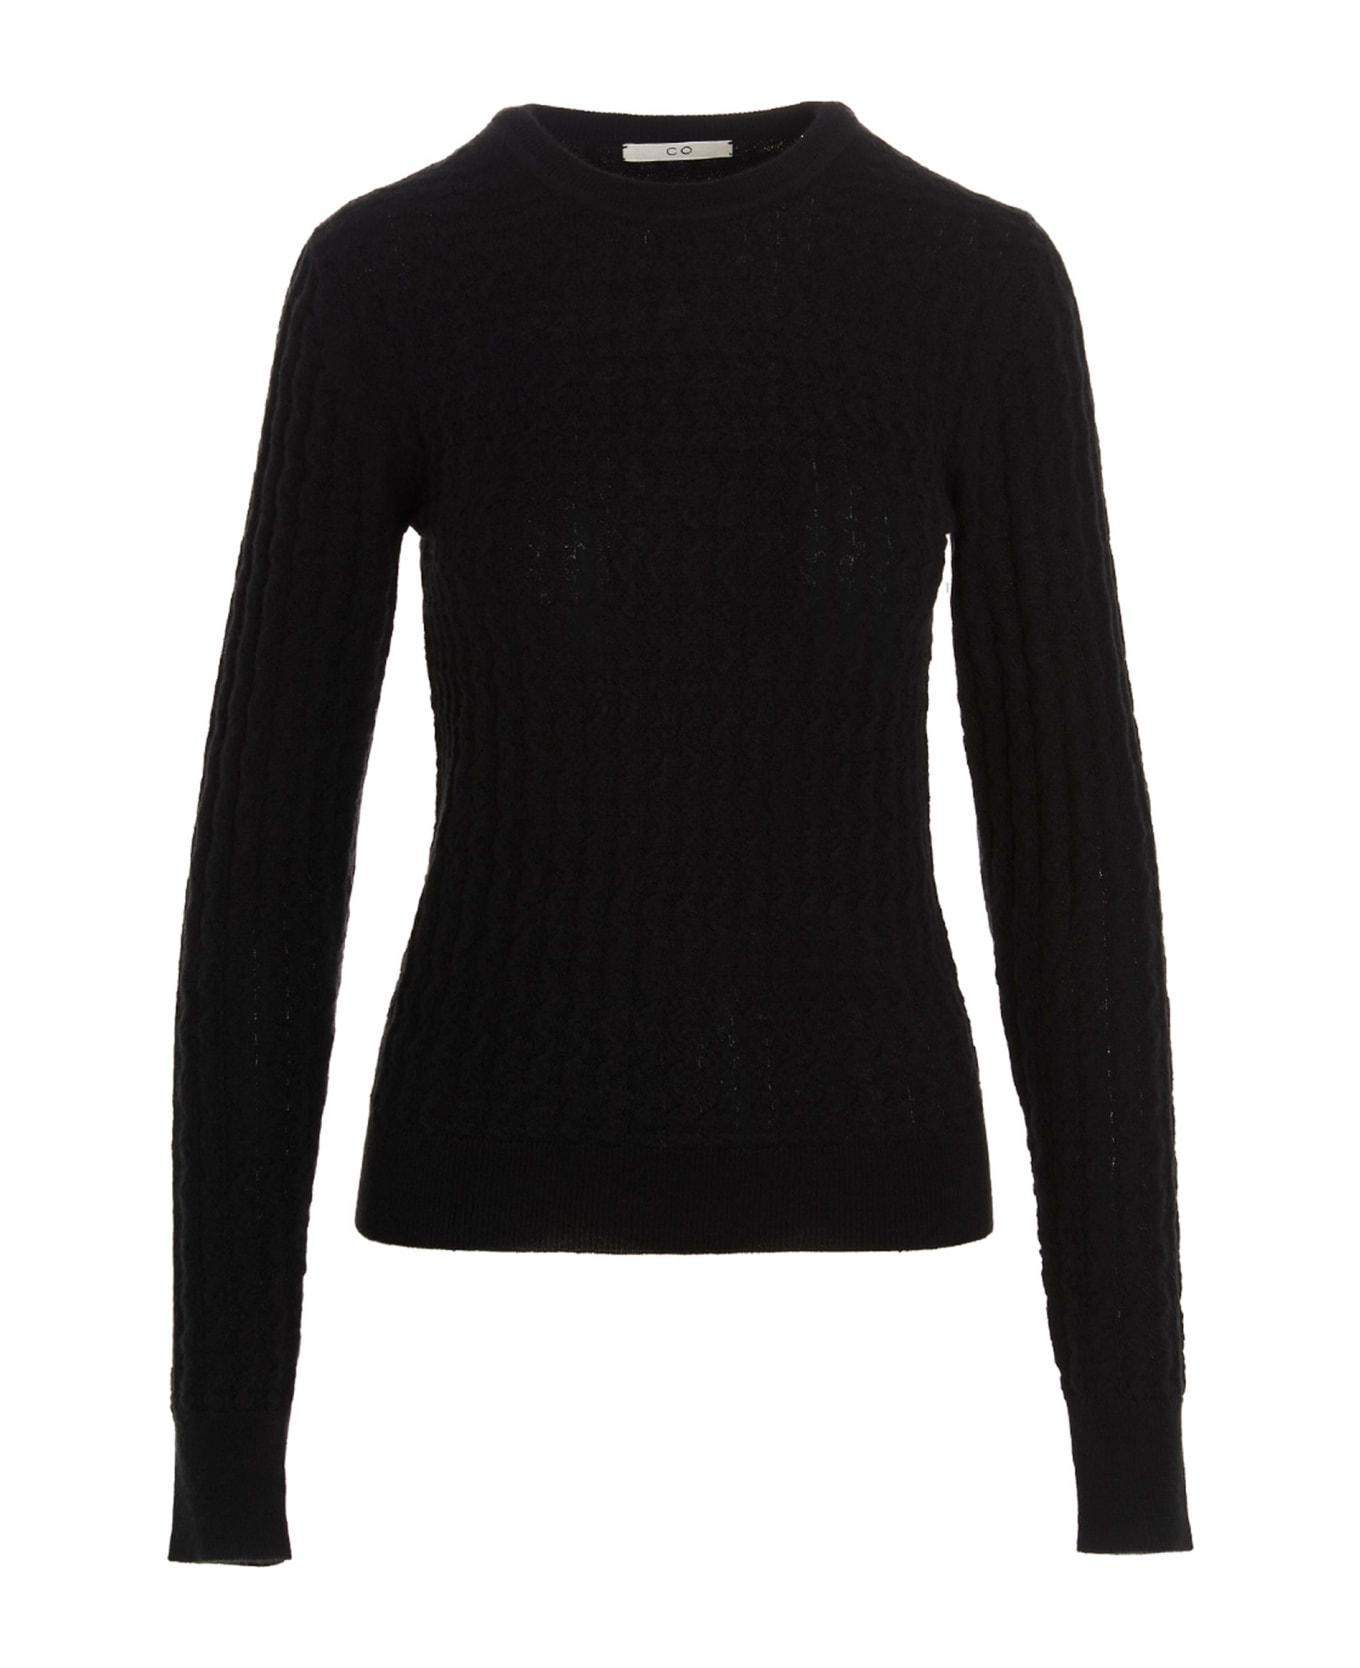 Co Worked Sweater - Black  